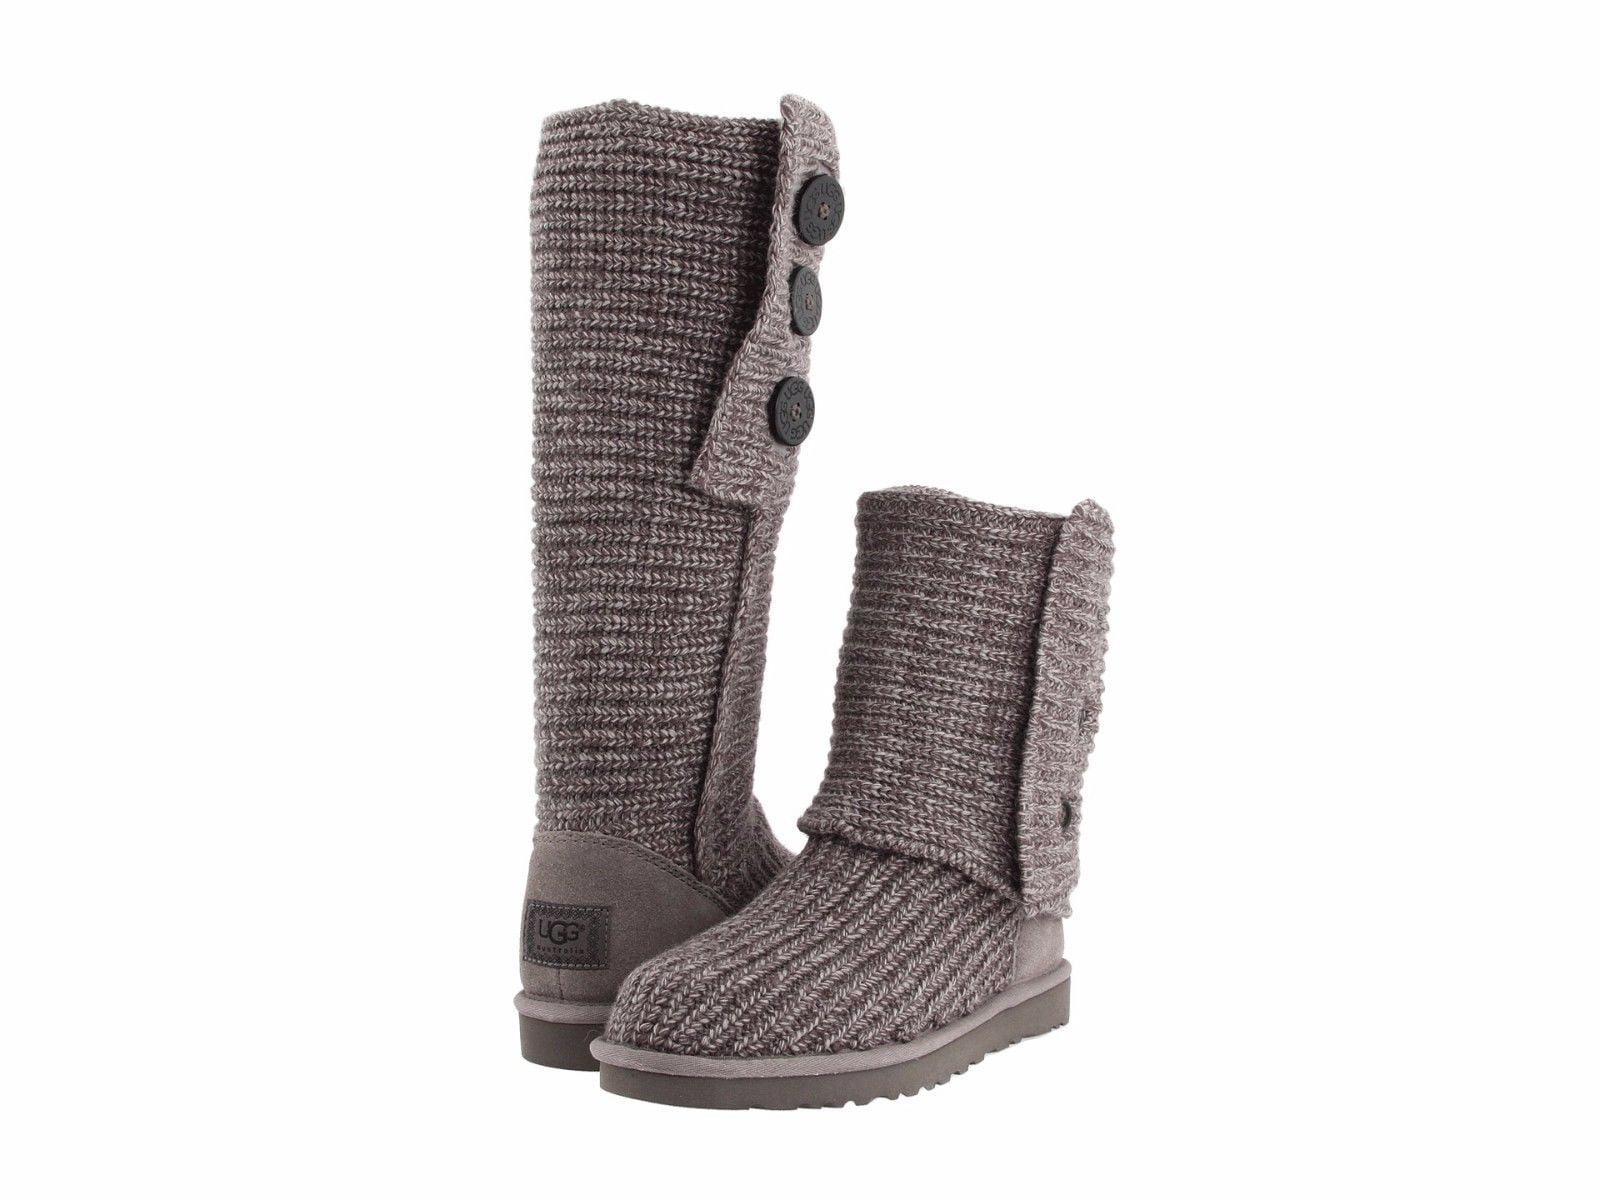 gray knitted uggs